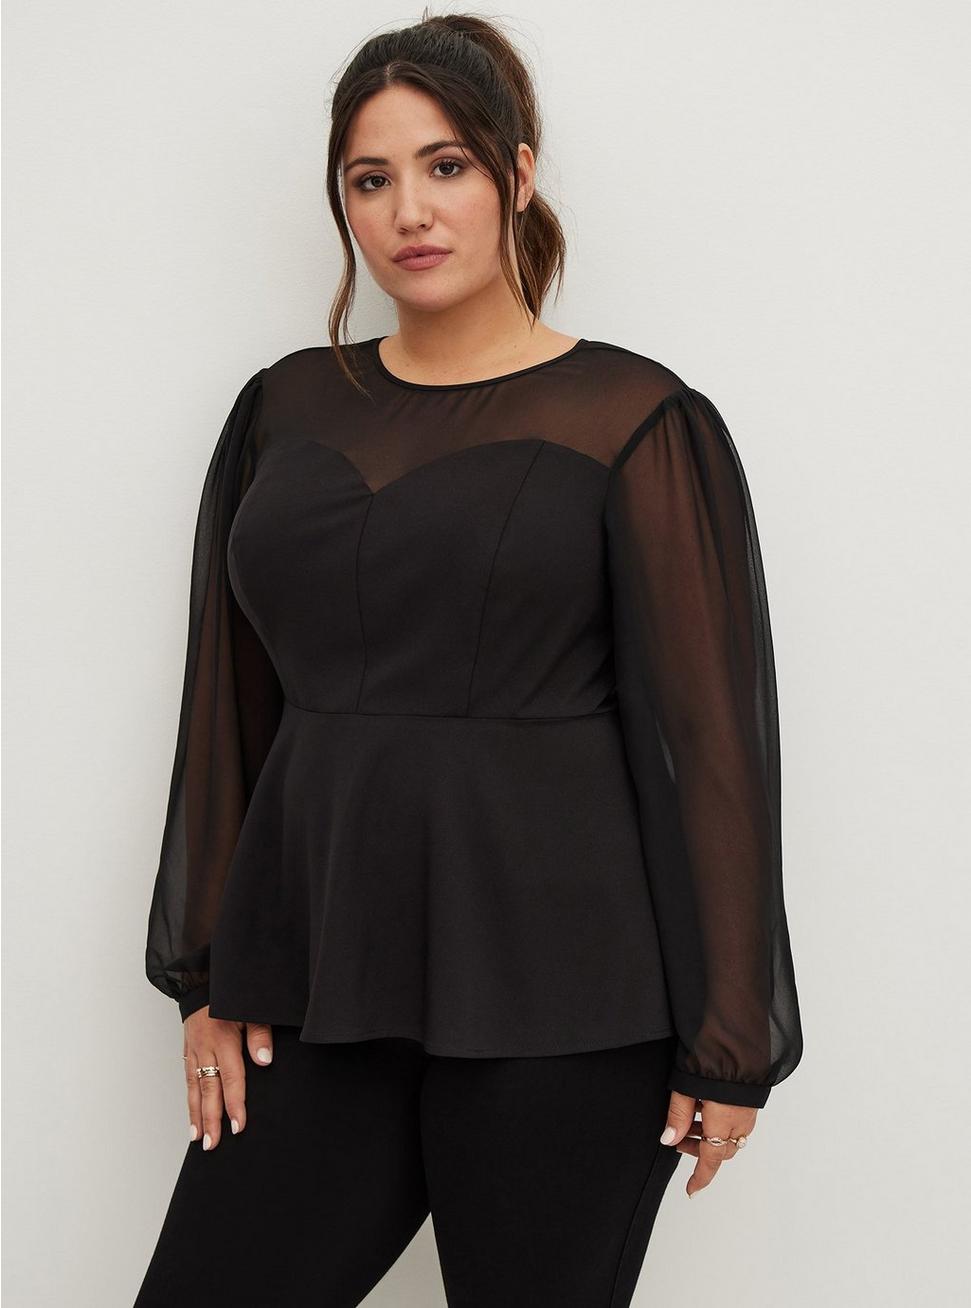 Torrid Floral Mesh Inset Top  Plus size outfits, Trendy plus size clothing,  Trendy plus size fashion